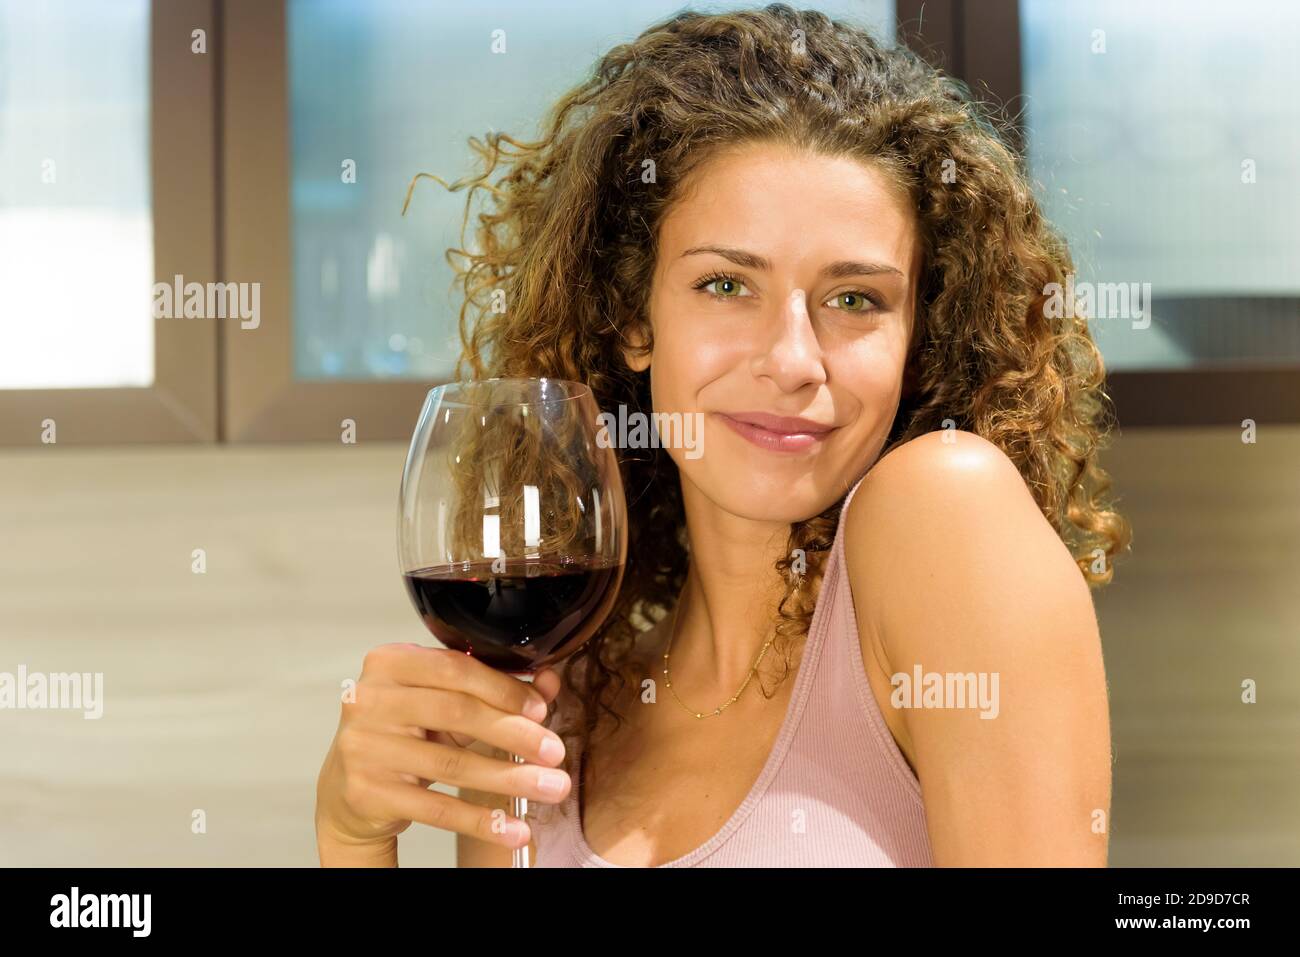 Attractive friendly young woman with a lovely warm smile toasting the camera with a large elegant glass of red wine to celebrate in a close up portrai Stock Photo